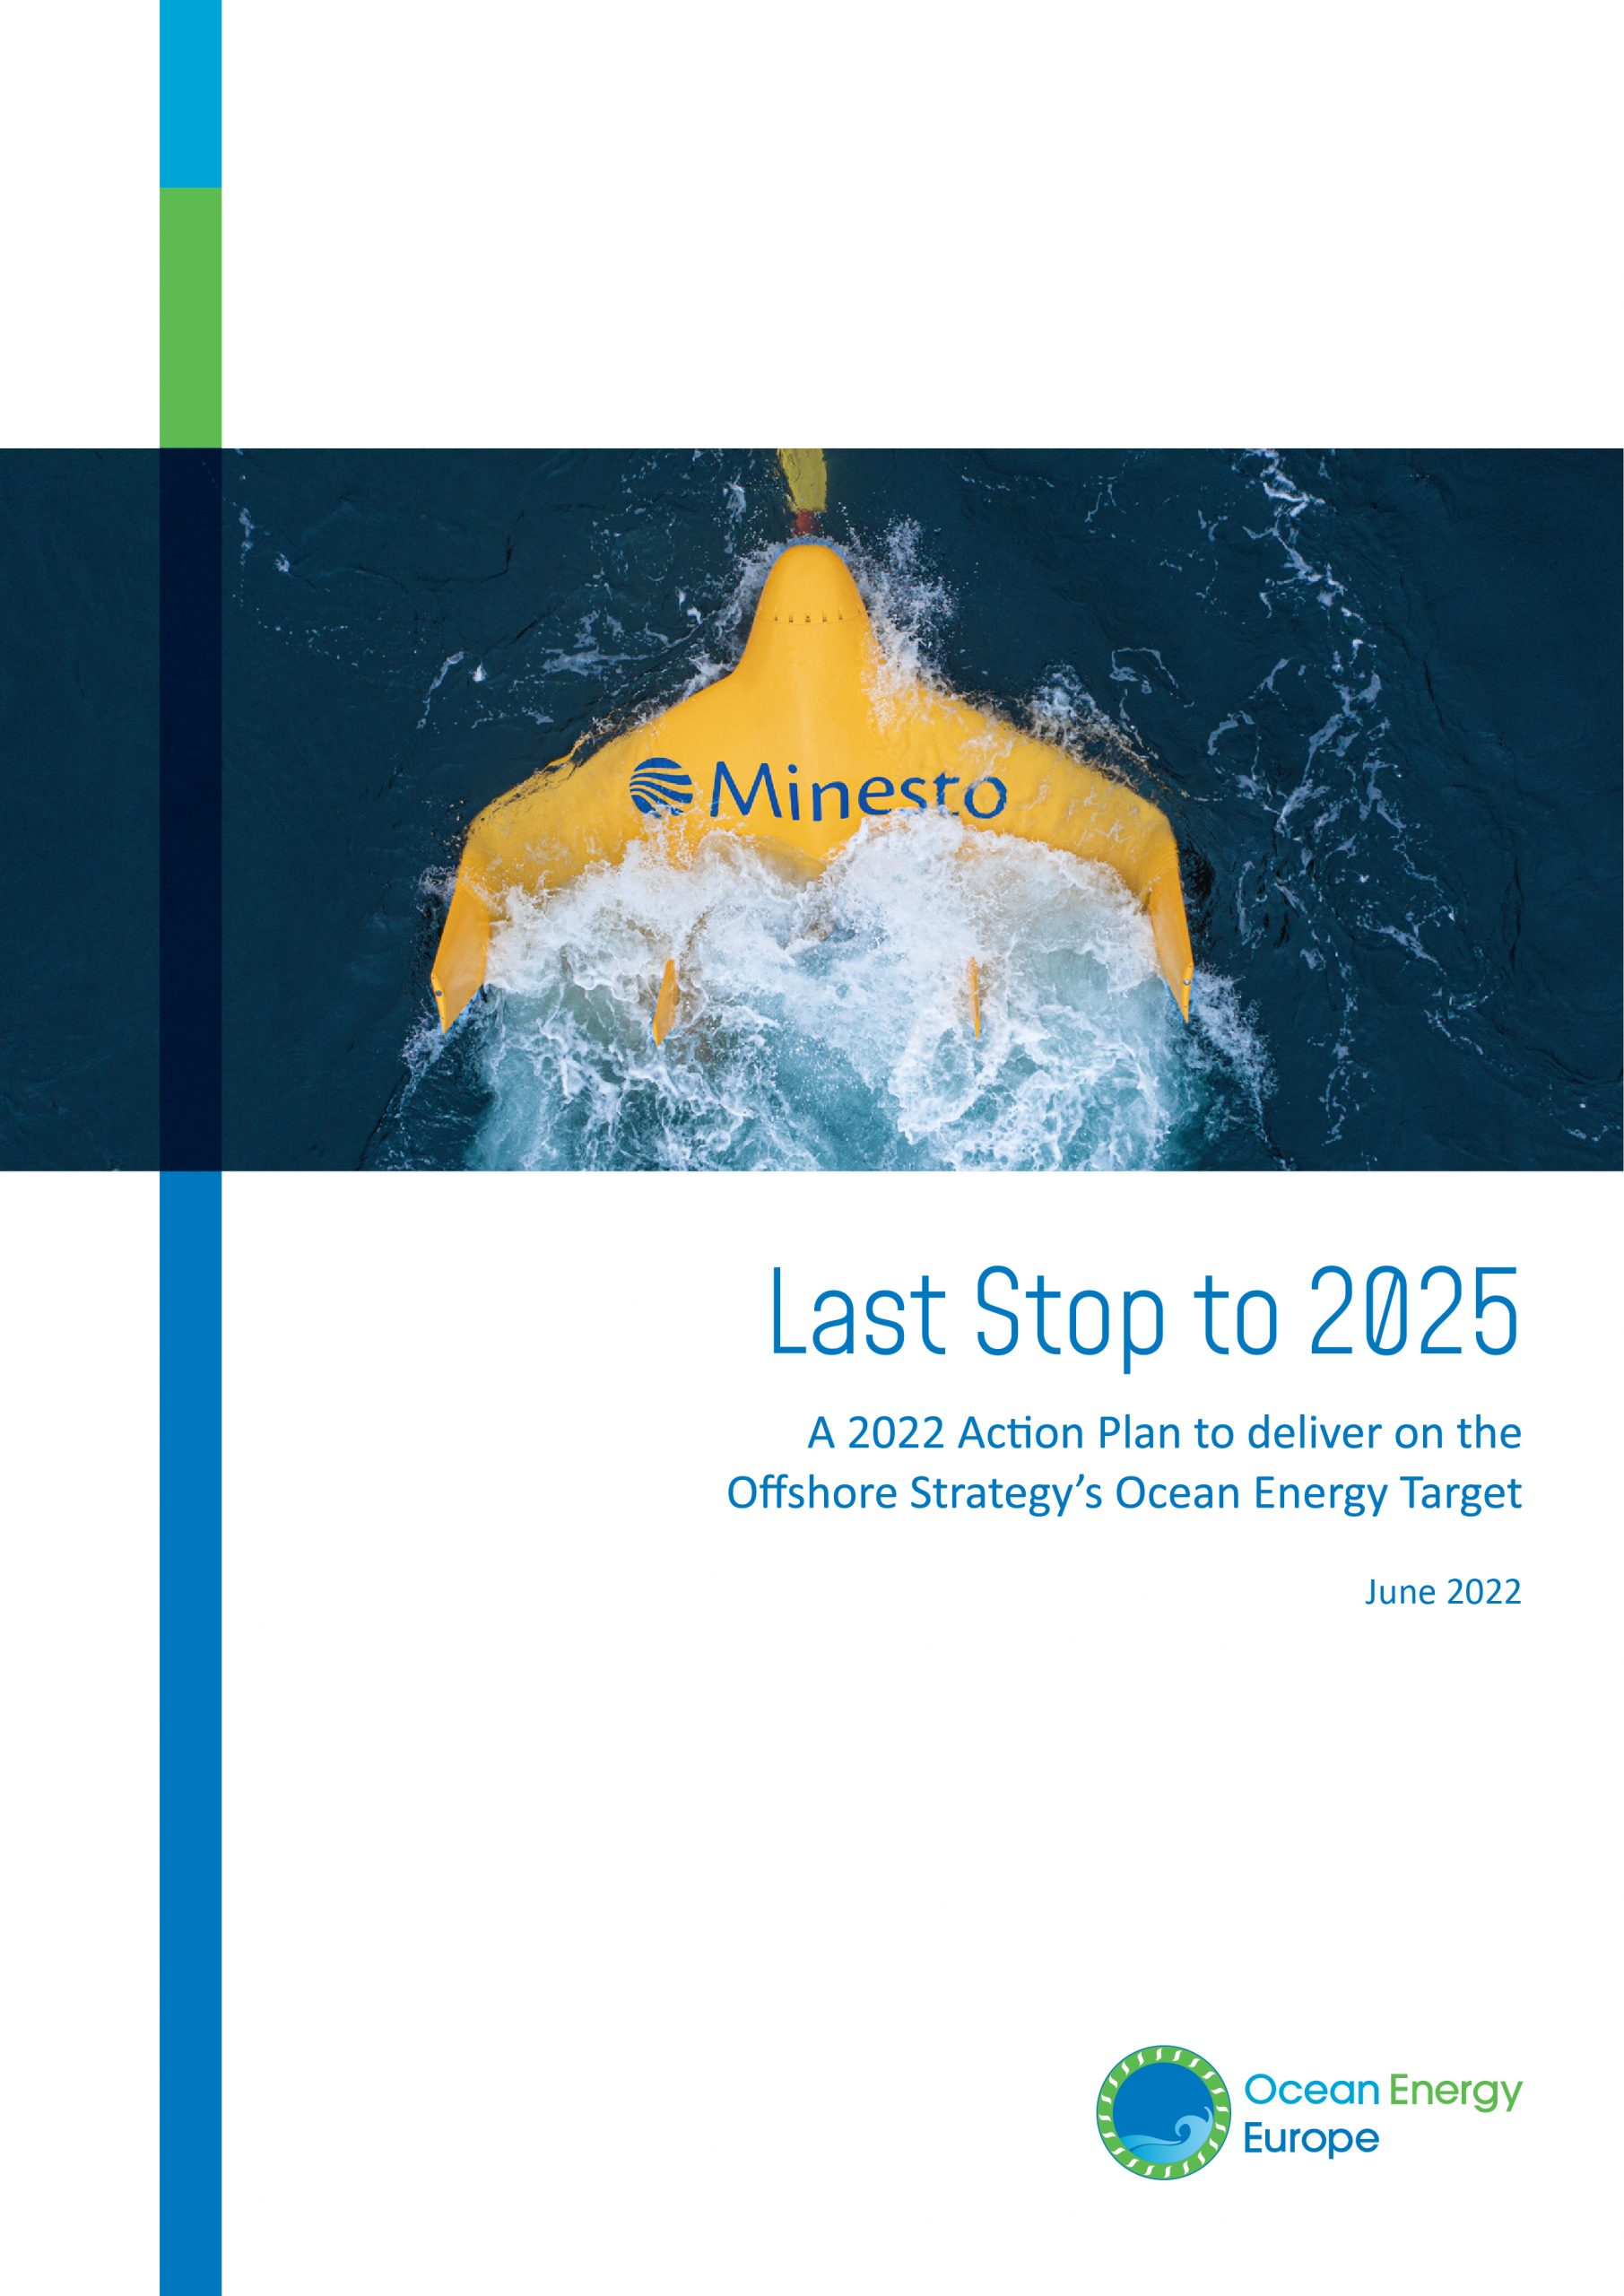 Last Stop to 2025 – A 2022 Action Plan to deliver on the Offshore Strategy’s Ocean Energy Target